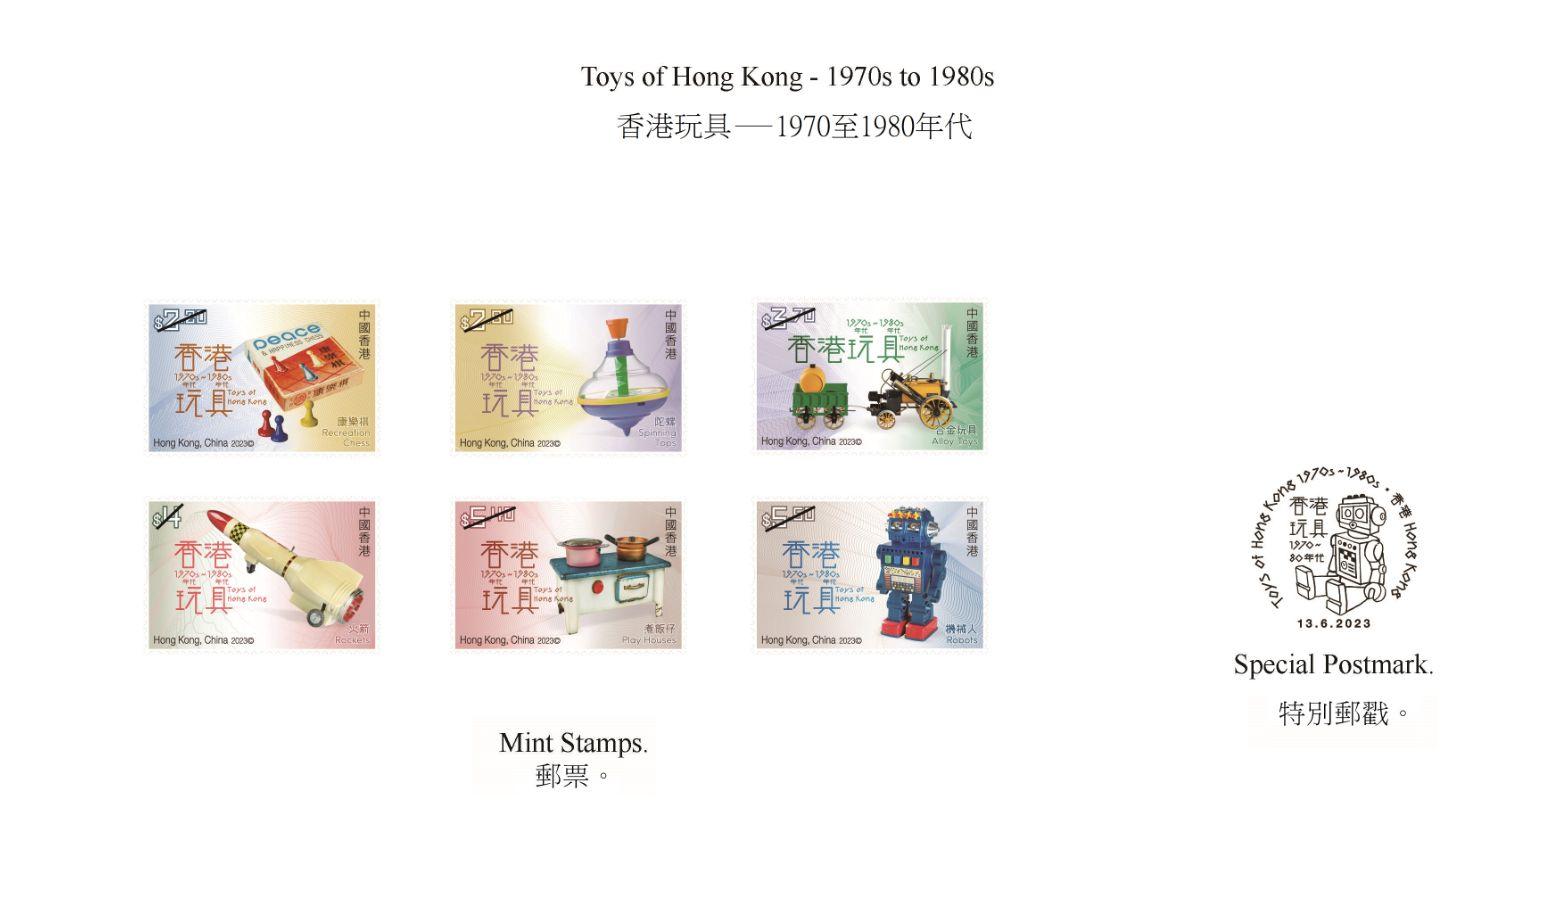 Hongkong Post will launch a special stamp issue and associated philatelic products on the theme of "Toys of Hong Kong - 1970s to 1980s" on June 13 (Tuesday). Photos show the mint stamps and the special postmark.
